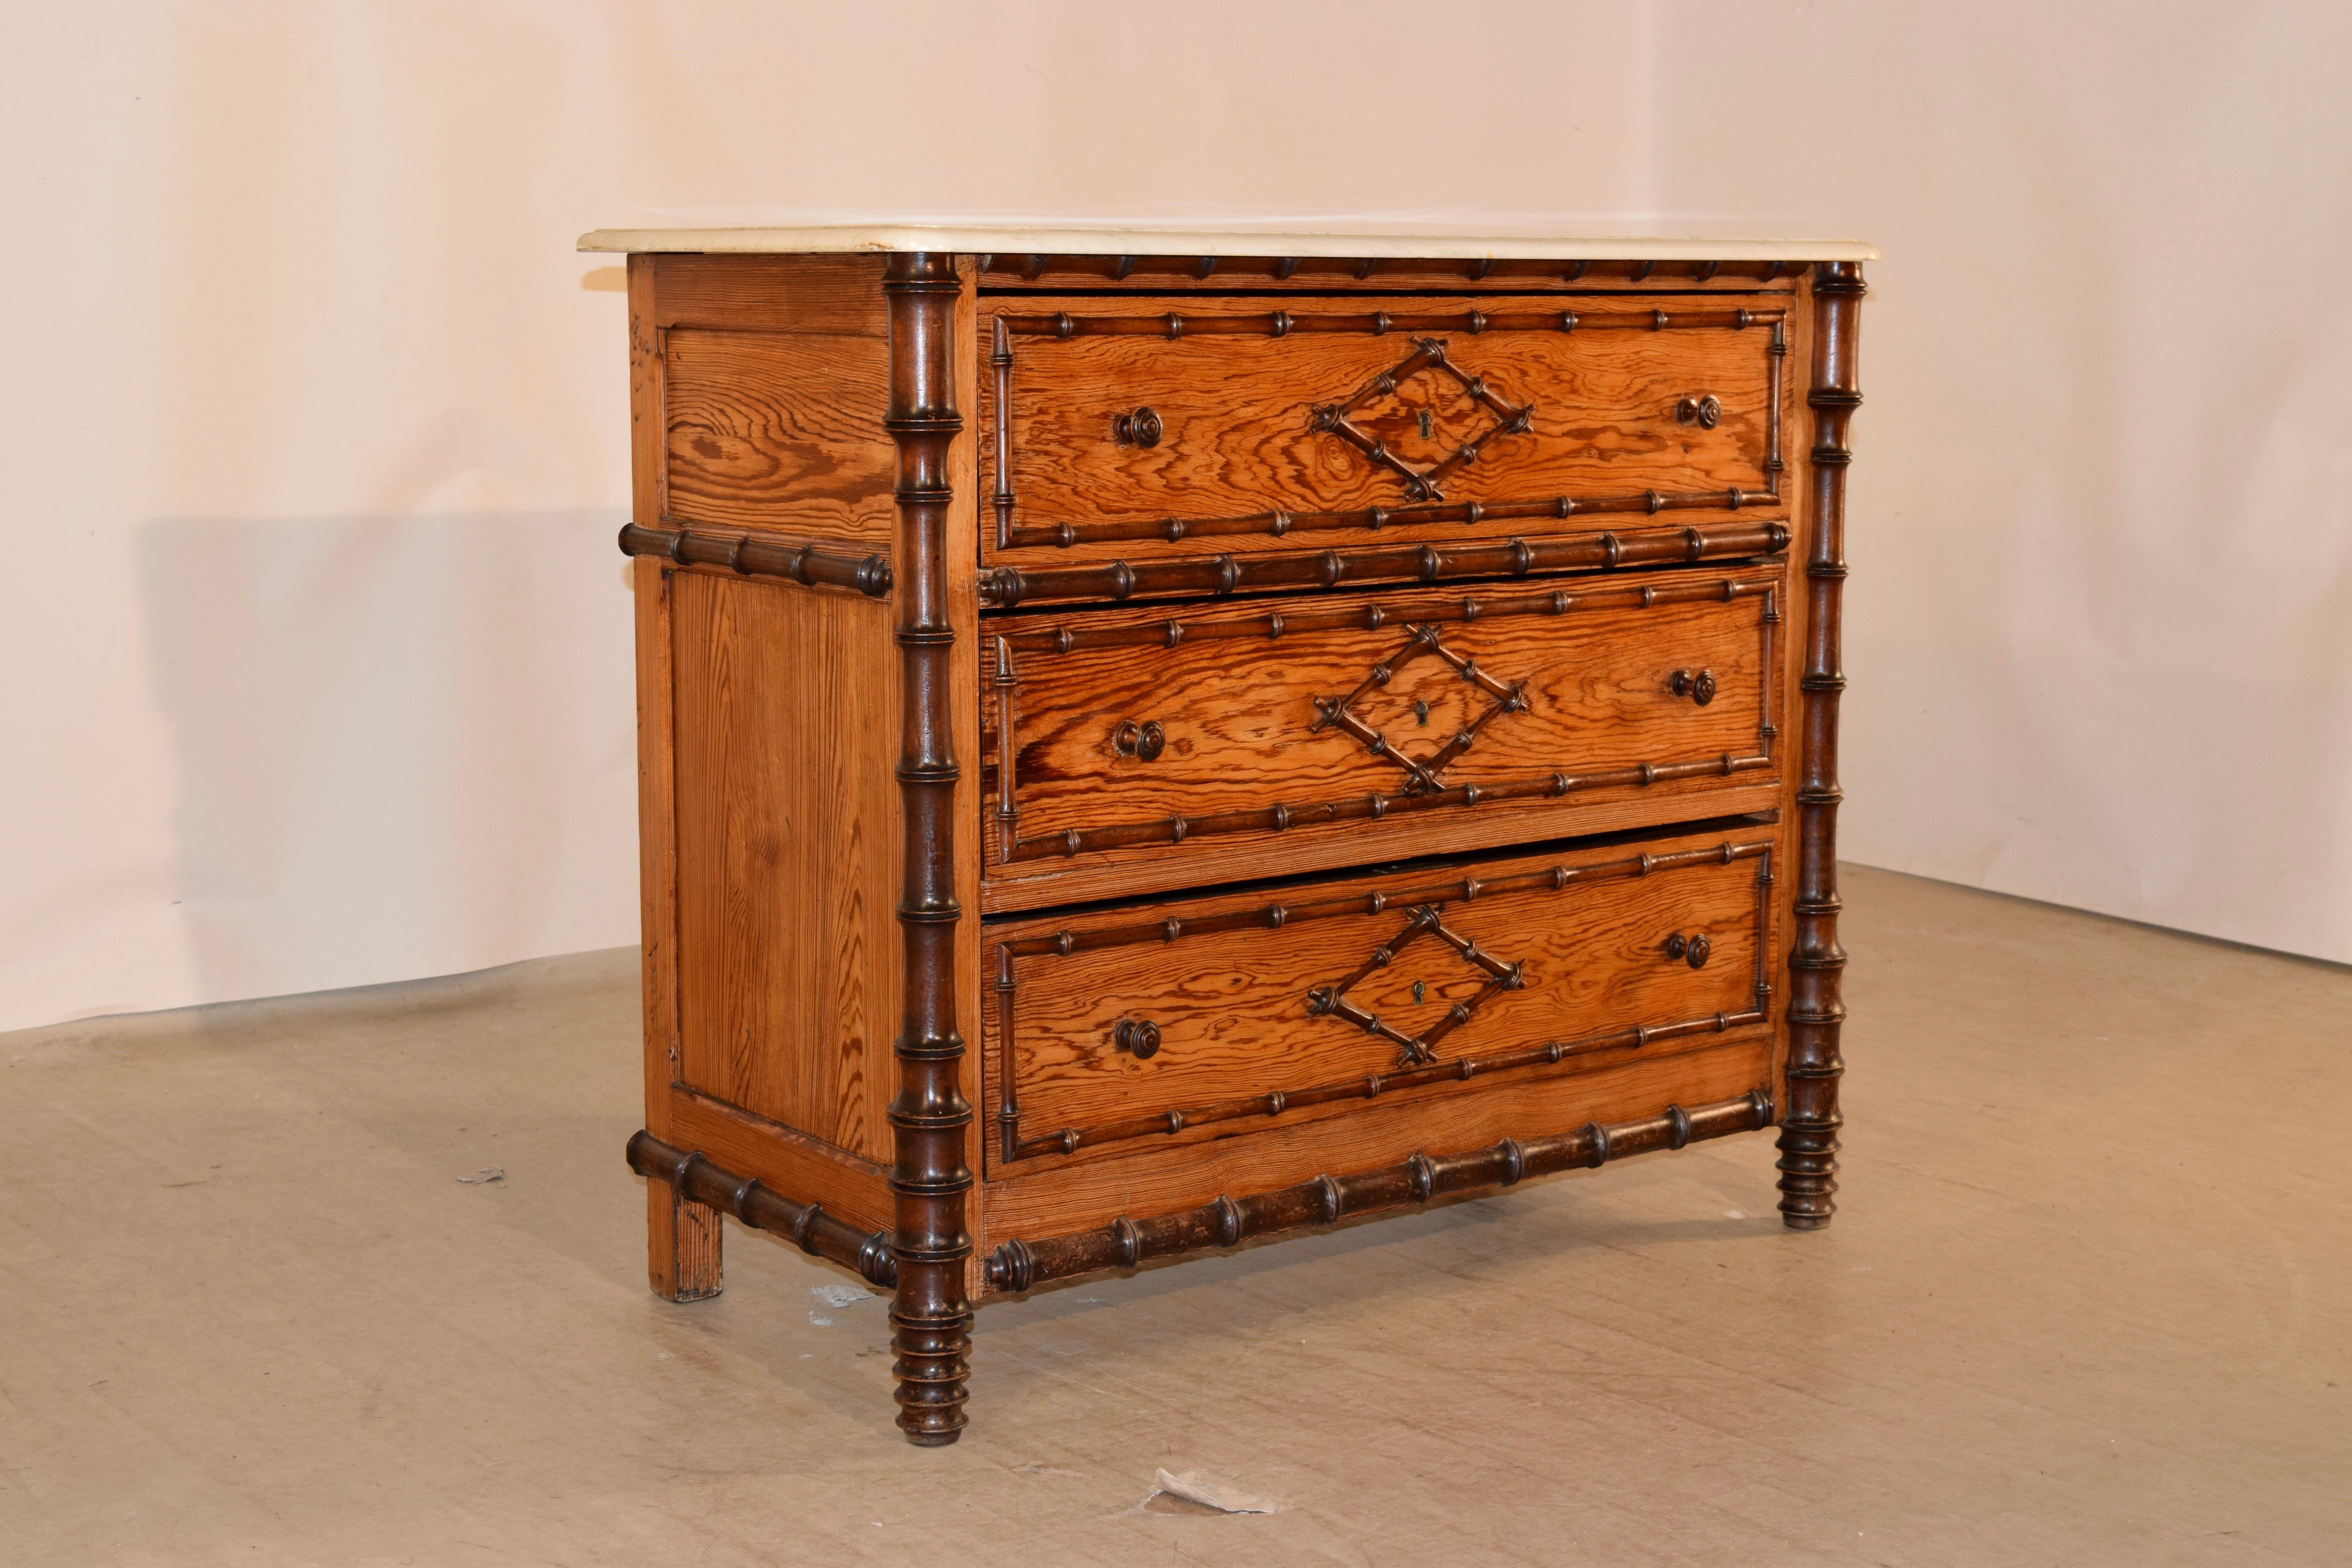 19th century faux bamboo chest of drawers from France with a removable Carrara marble top, following down to a pitch pine case with hand turned cherry wood applied moldings. The case has three drawers flanked by hand turned cherry legs which are